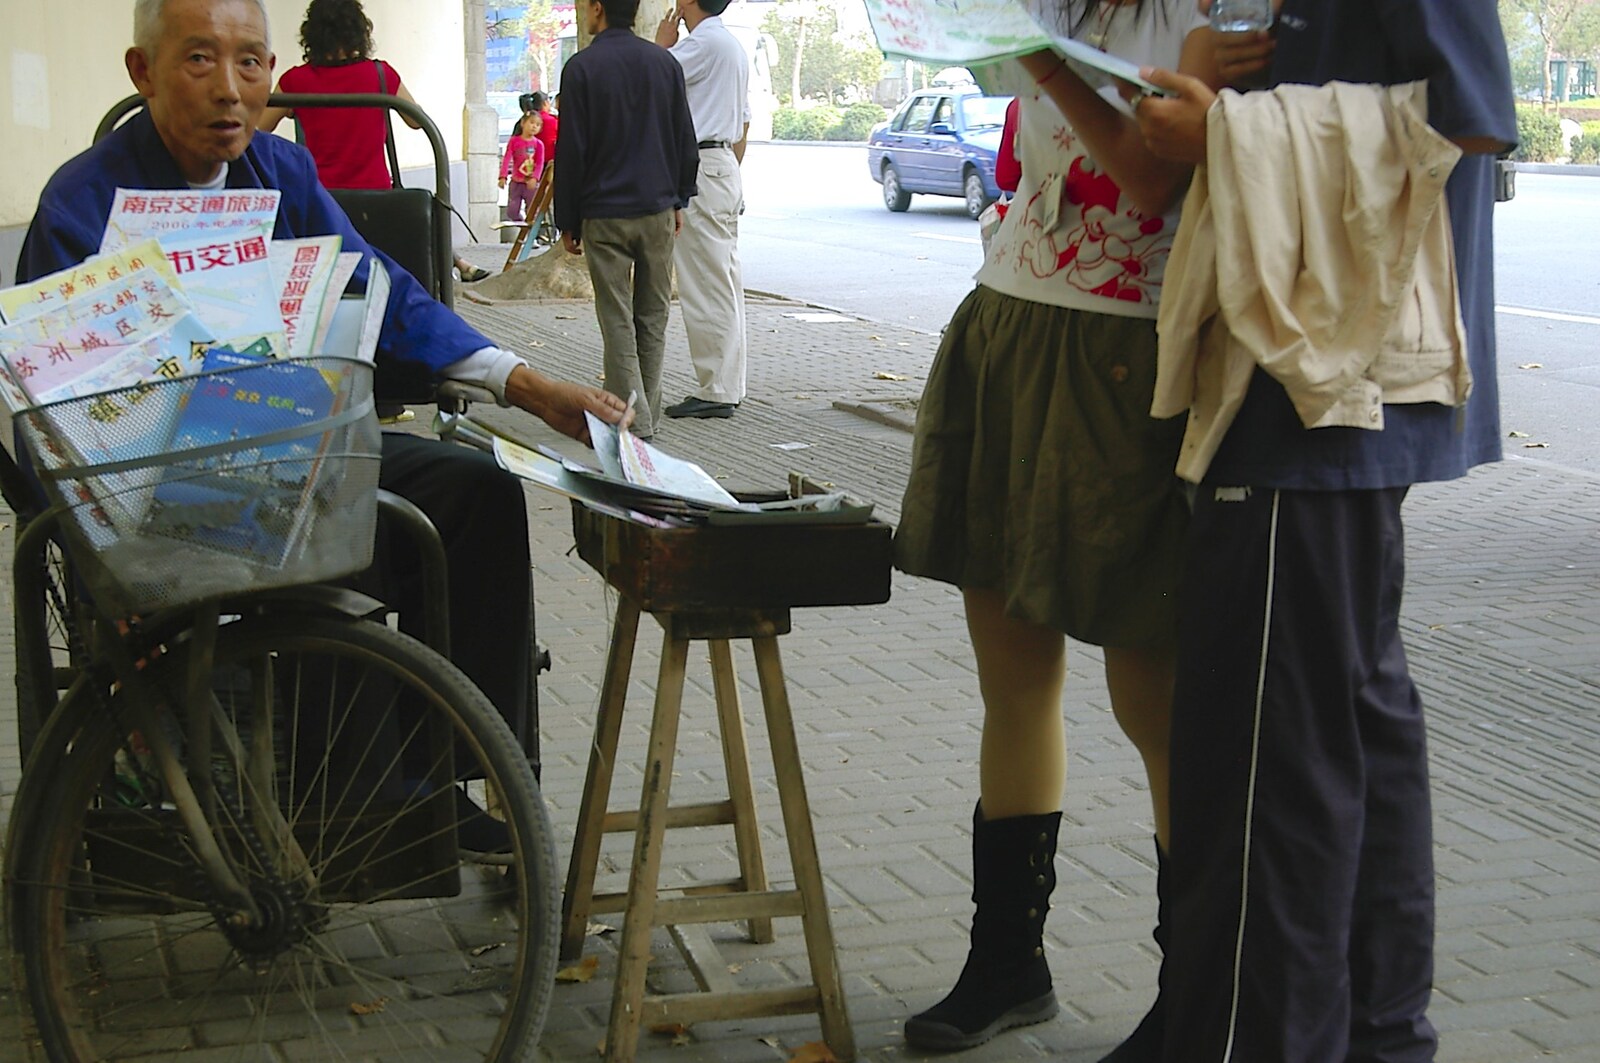 An old dude sells pamphlets from A Few Days in Nanjing, Jiangsu Province, China - 7th October 2006